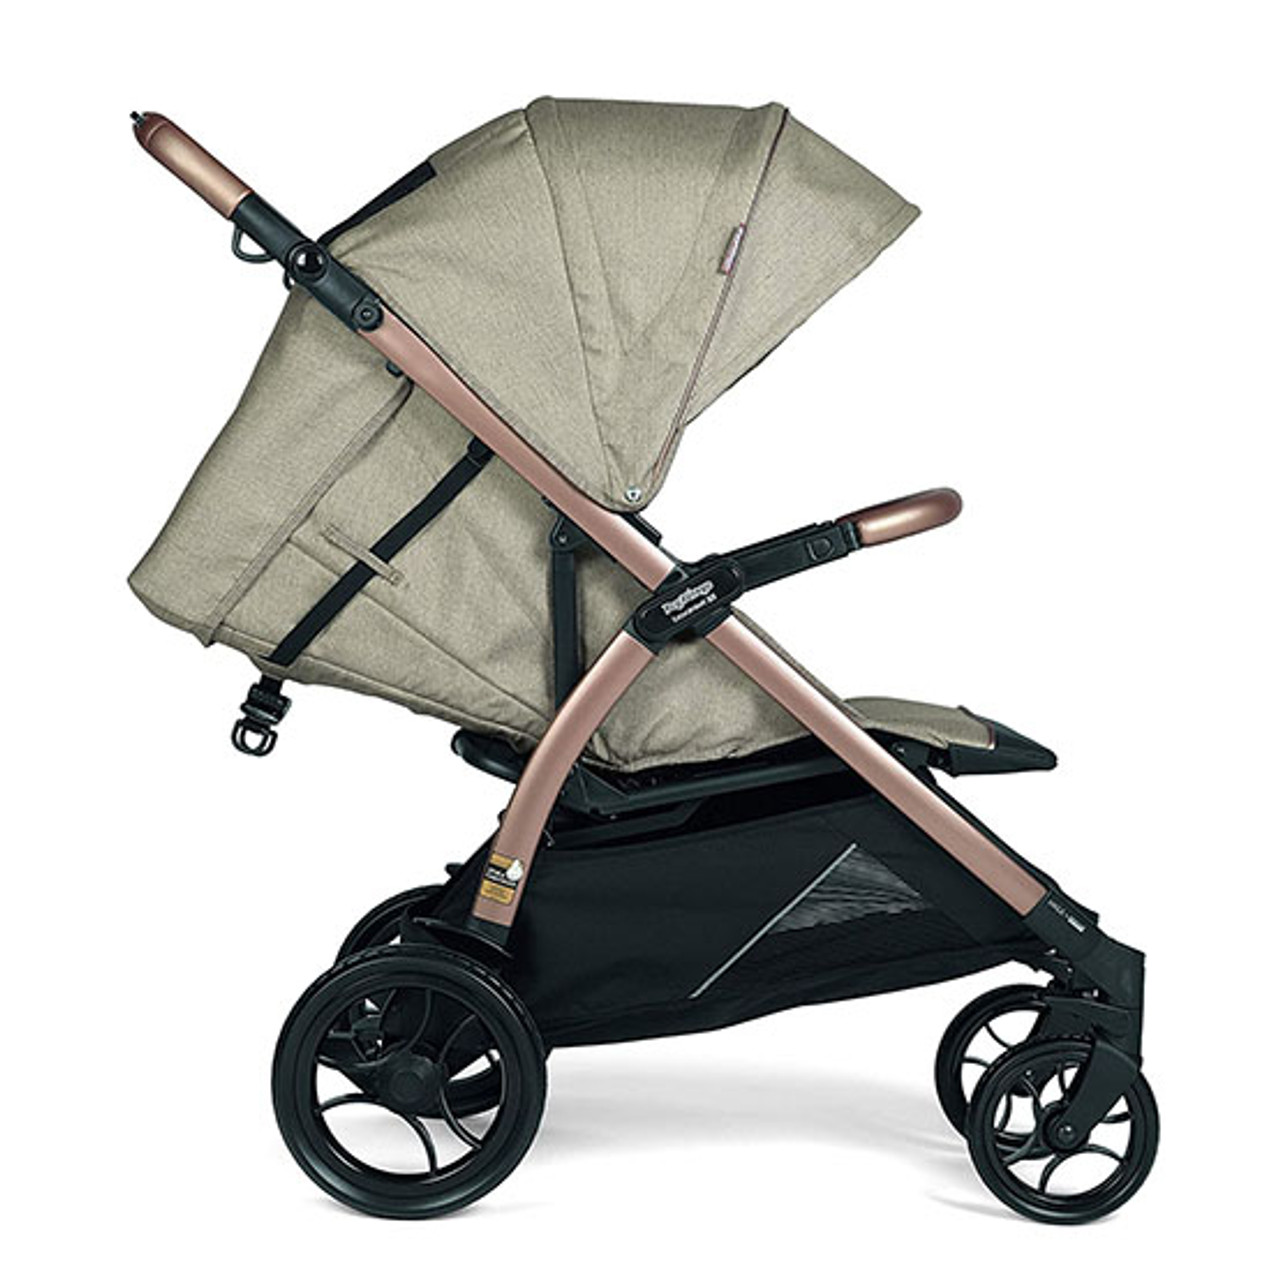 Peg Perego Booklet 50 Travel System, Official Retailer